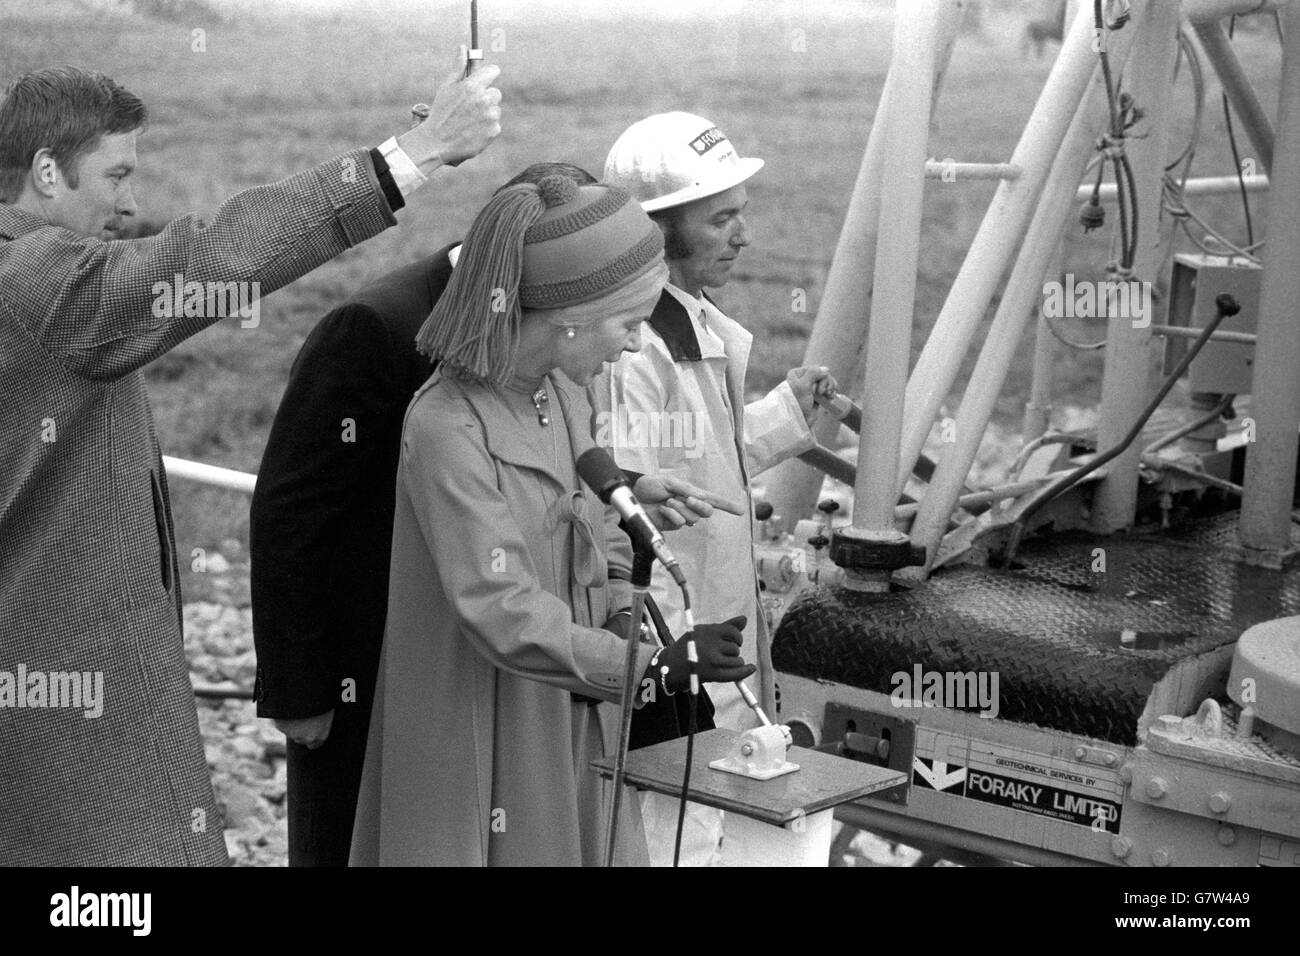 The Duchess of Kent starts drilling during the inauguration of the Selby coalfield, at Wistow, North Yorkshire. On completion the coalfield will employ 4,000 men and produce 10 million tons of coal a year. The very latest mining machines will be employed together with the most sophisticated techniques of controlling and monitoring what goes on underground. Stock Photo